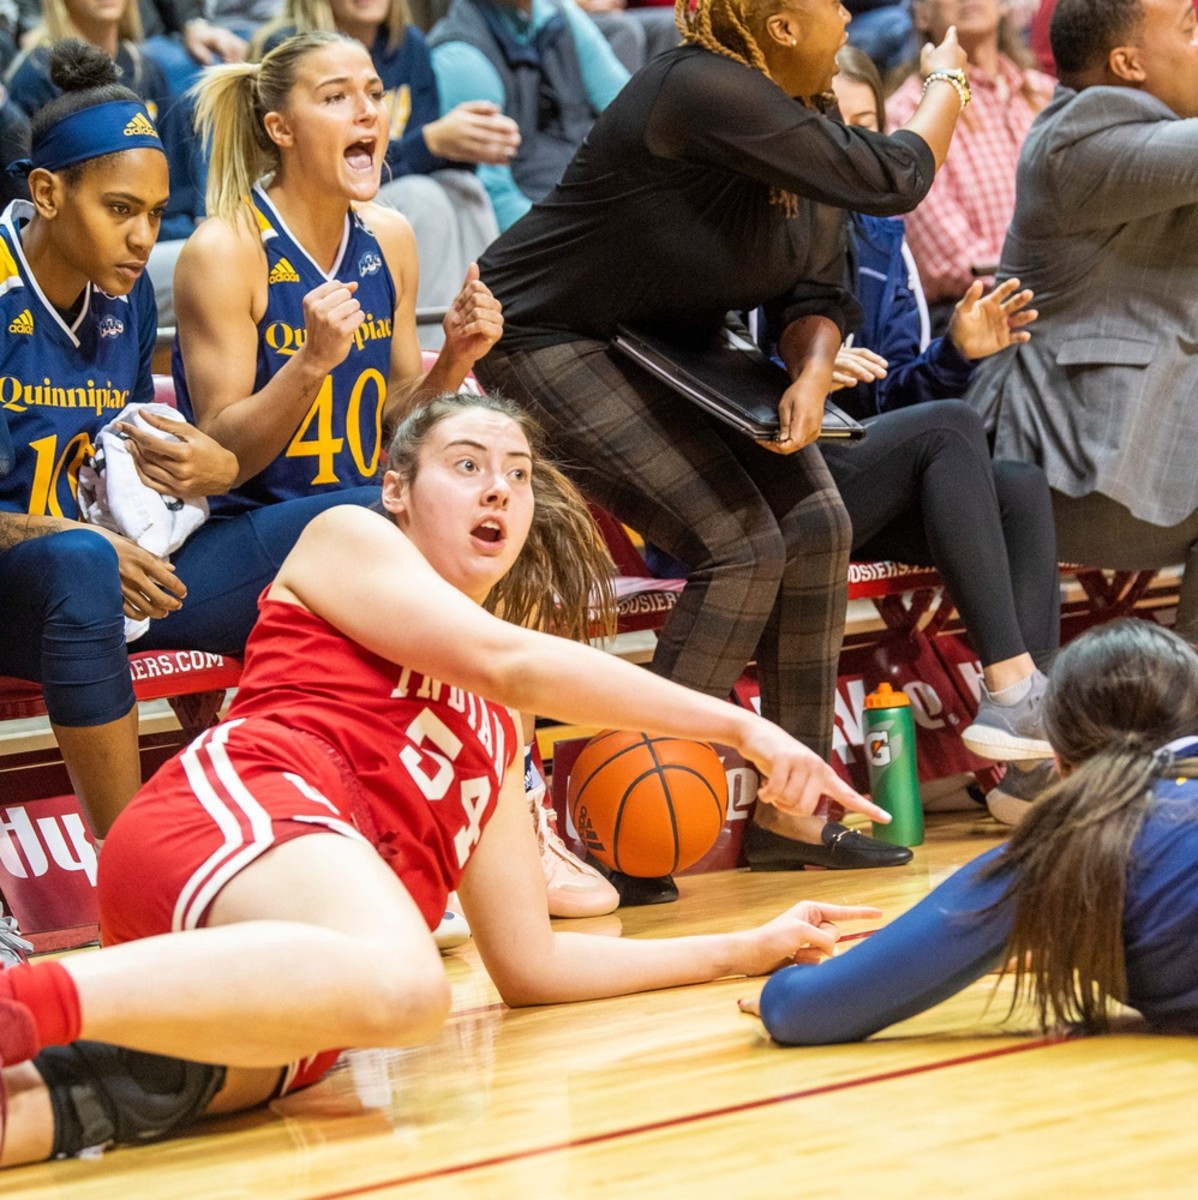 Indiana's Mackenzie Holmes (54) claims it is Indiana's ball during the Indiana versus Quinnipiac women's basketball game at Simon Skjodt Assembly Hall on Sunday, Nov. 20, 2022.